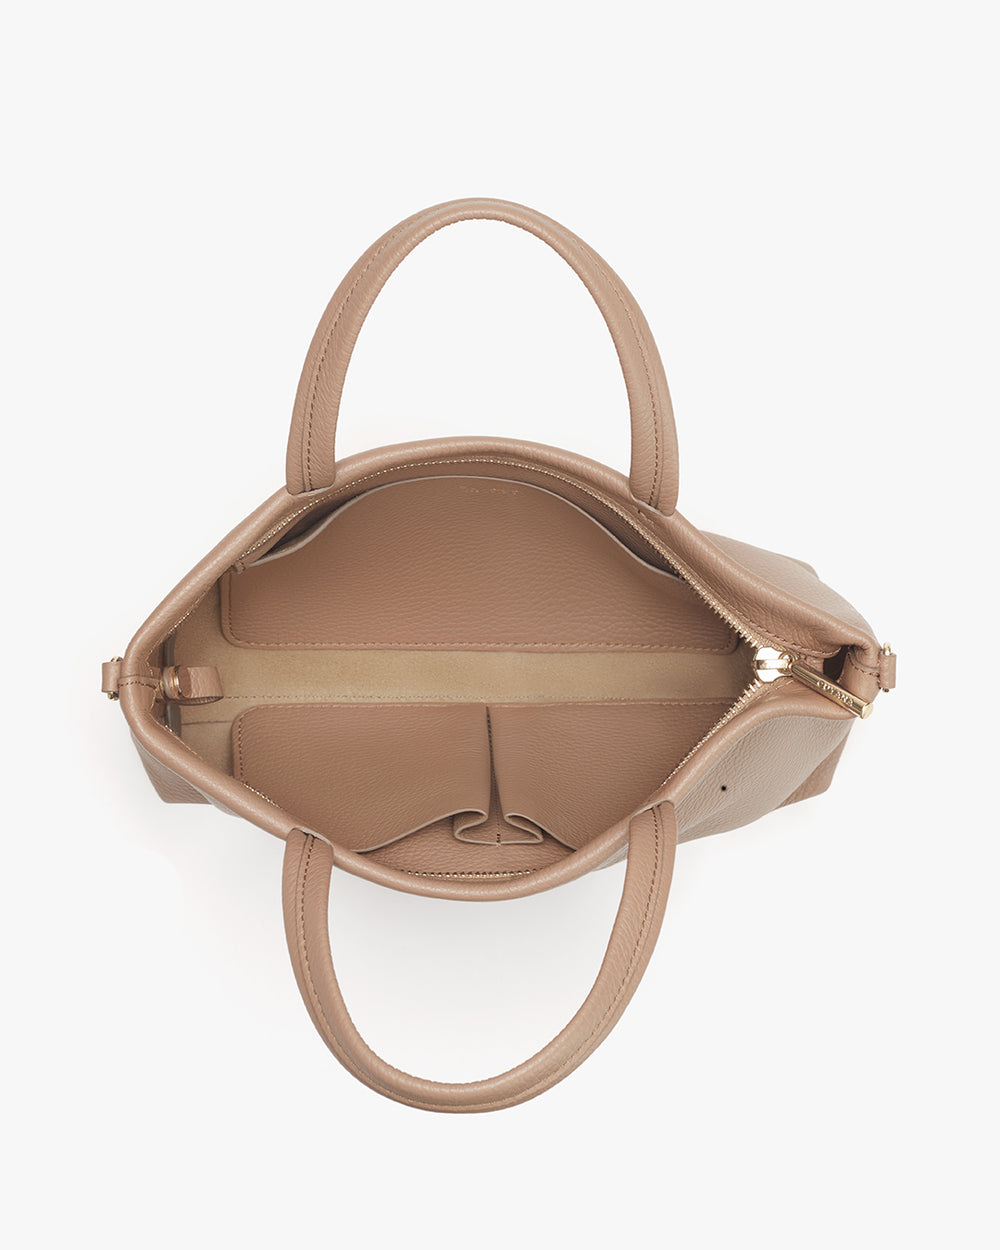 Top view of an open handbag with visible interior compartments.